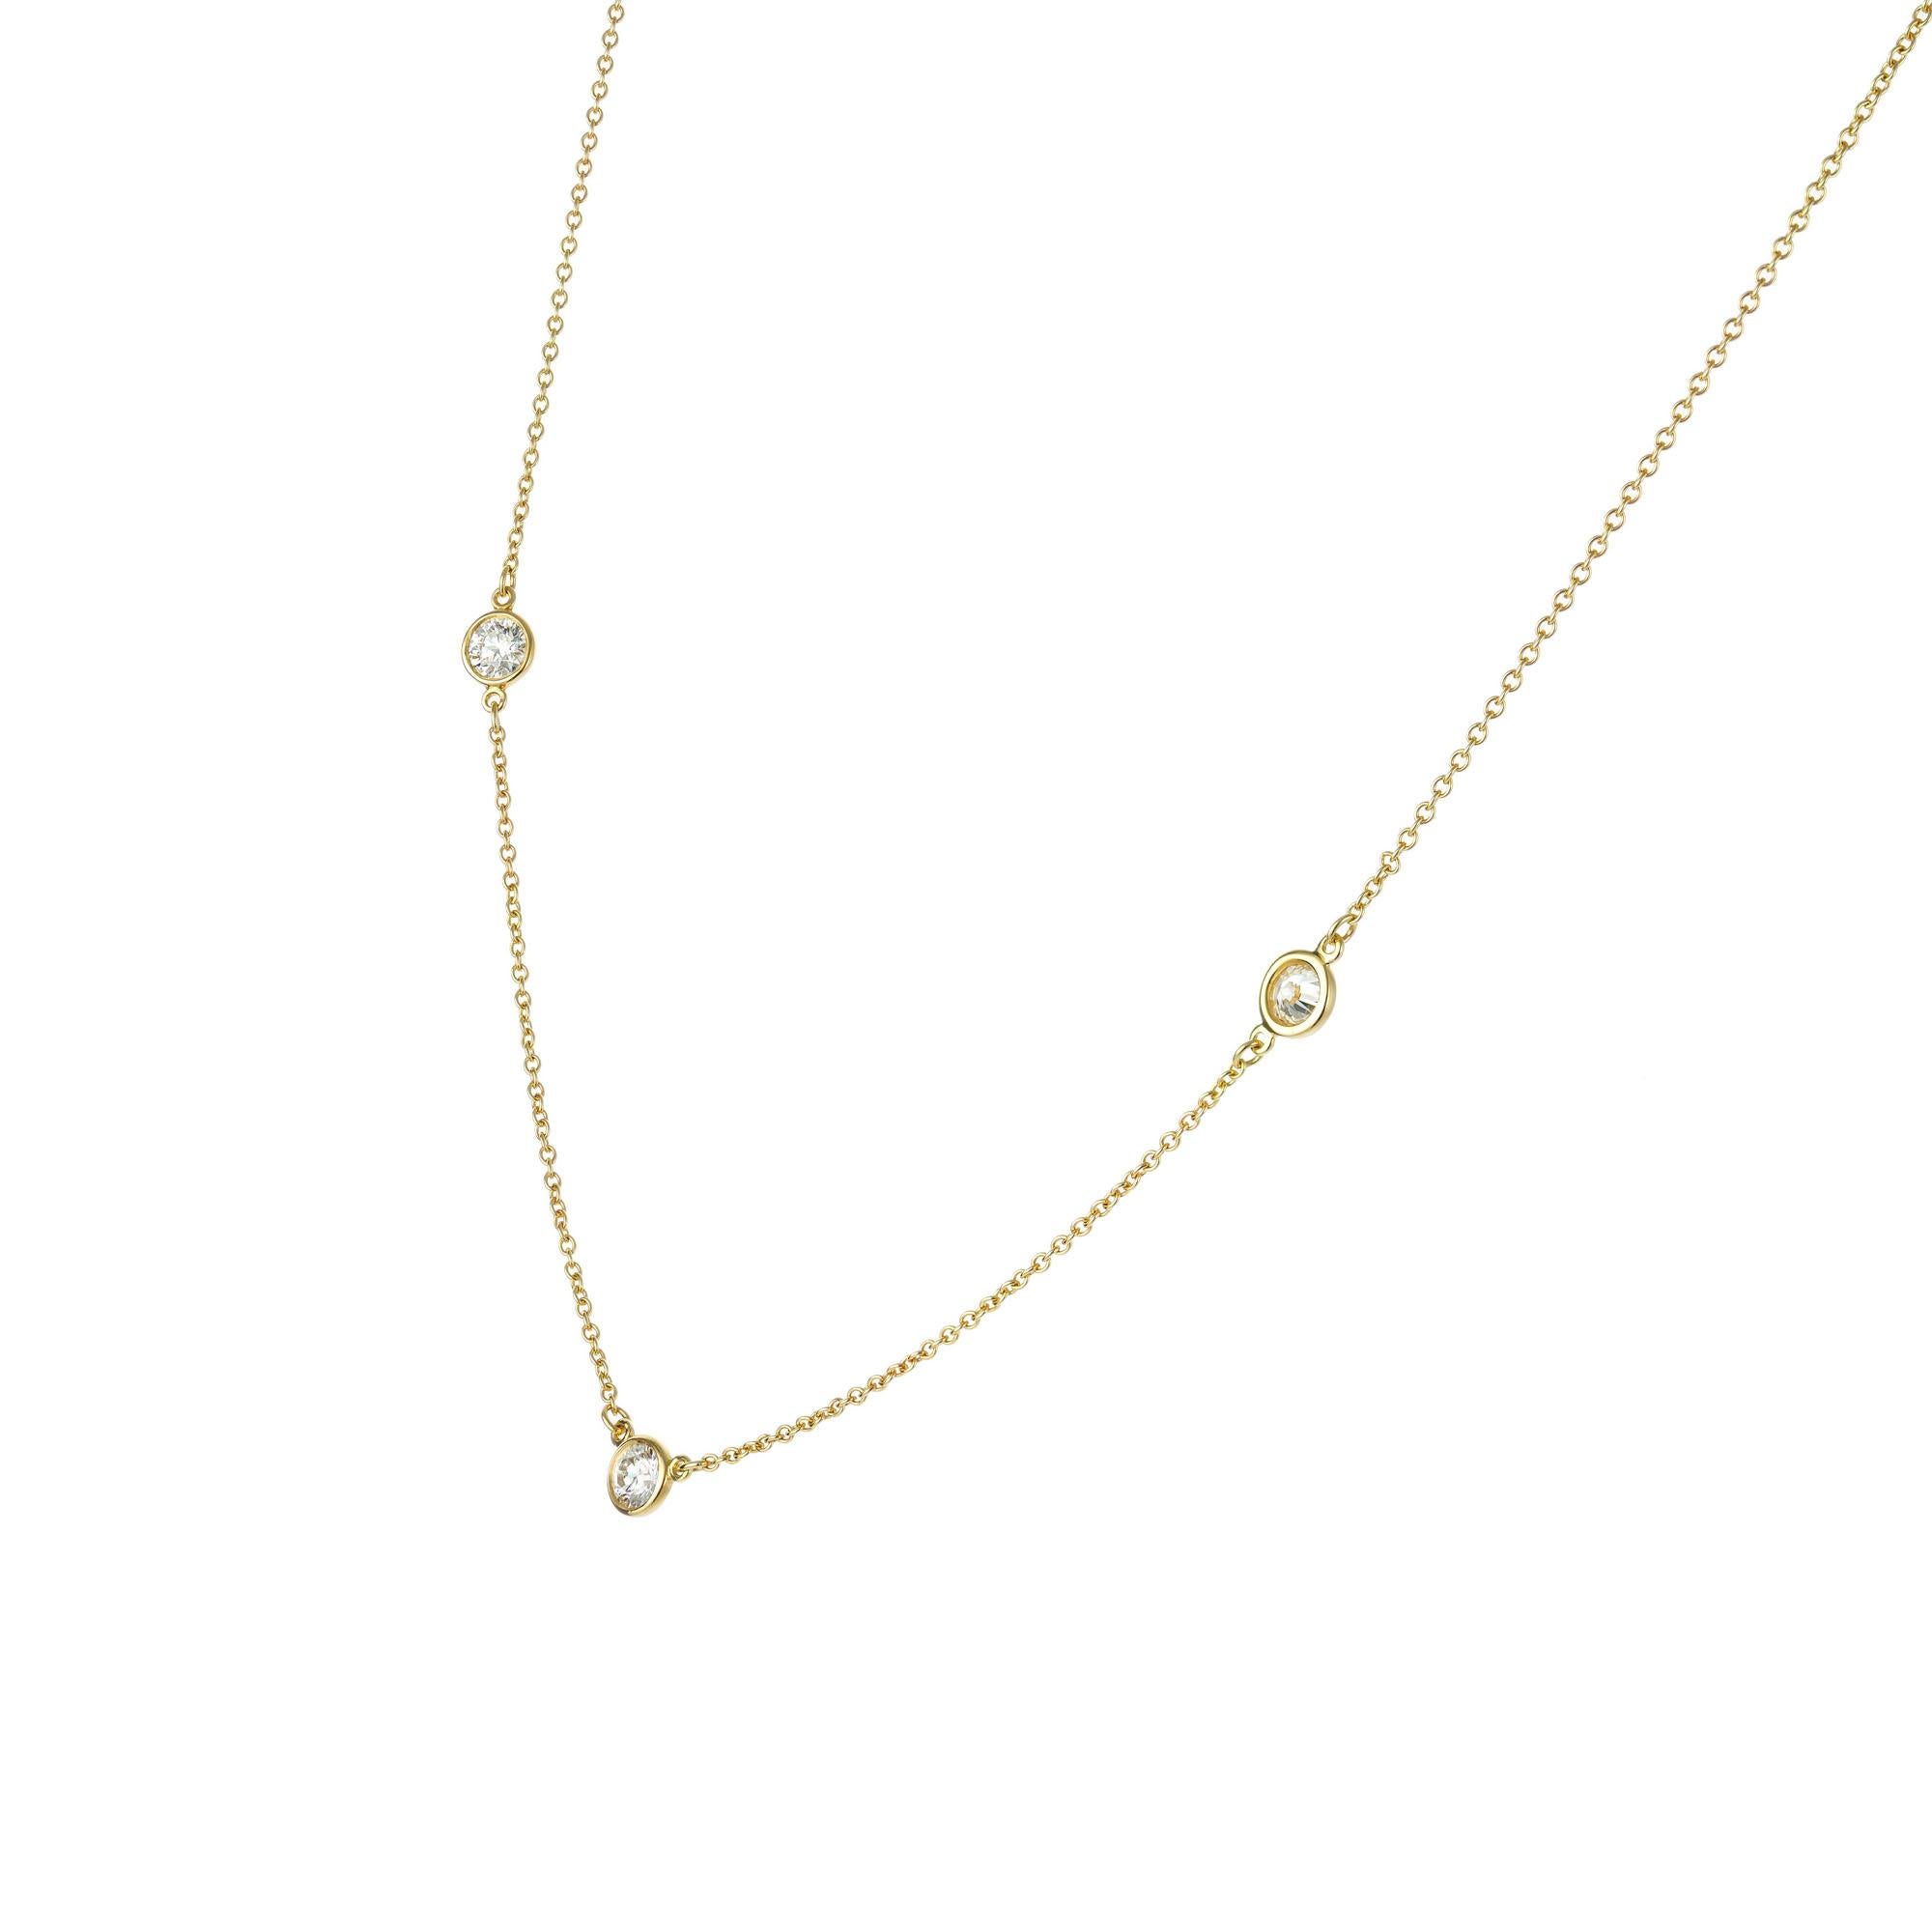 Tiffany & Co Elsa Peretti three diamond by the yard style necklace with fine white full cut diamonds. 16.5 inches long. 

3 Ideal round brilliant cut diamonds, .23ct each, approx. total weight .69cts, F-G, VS
18k Yellow gold
Stamped: 750
Hallmark: